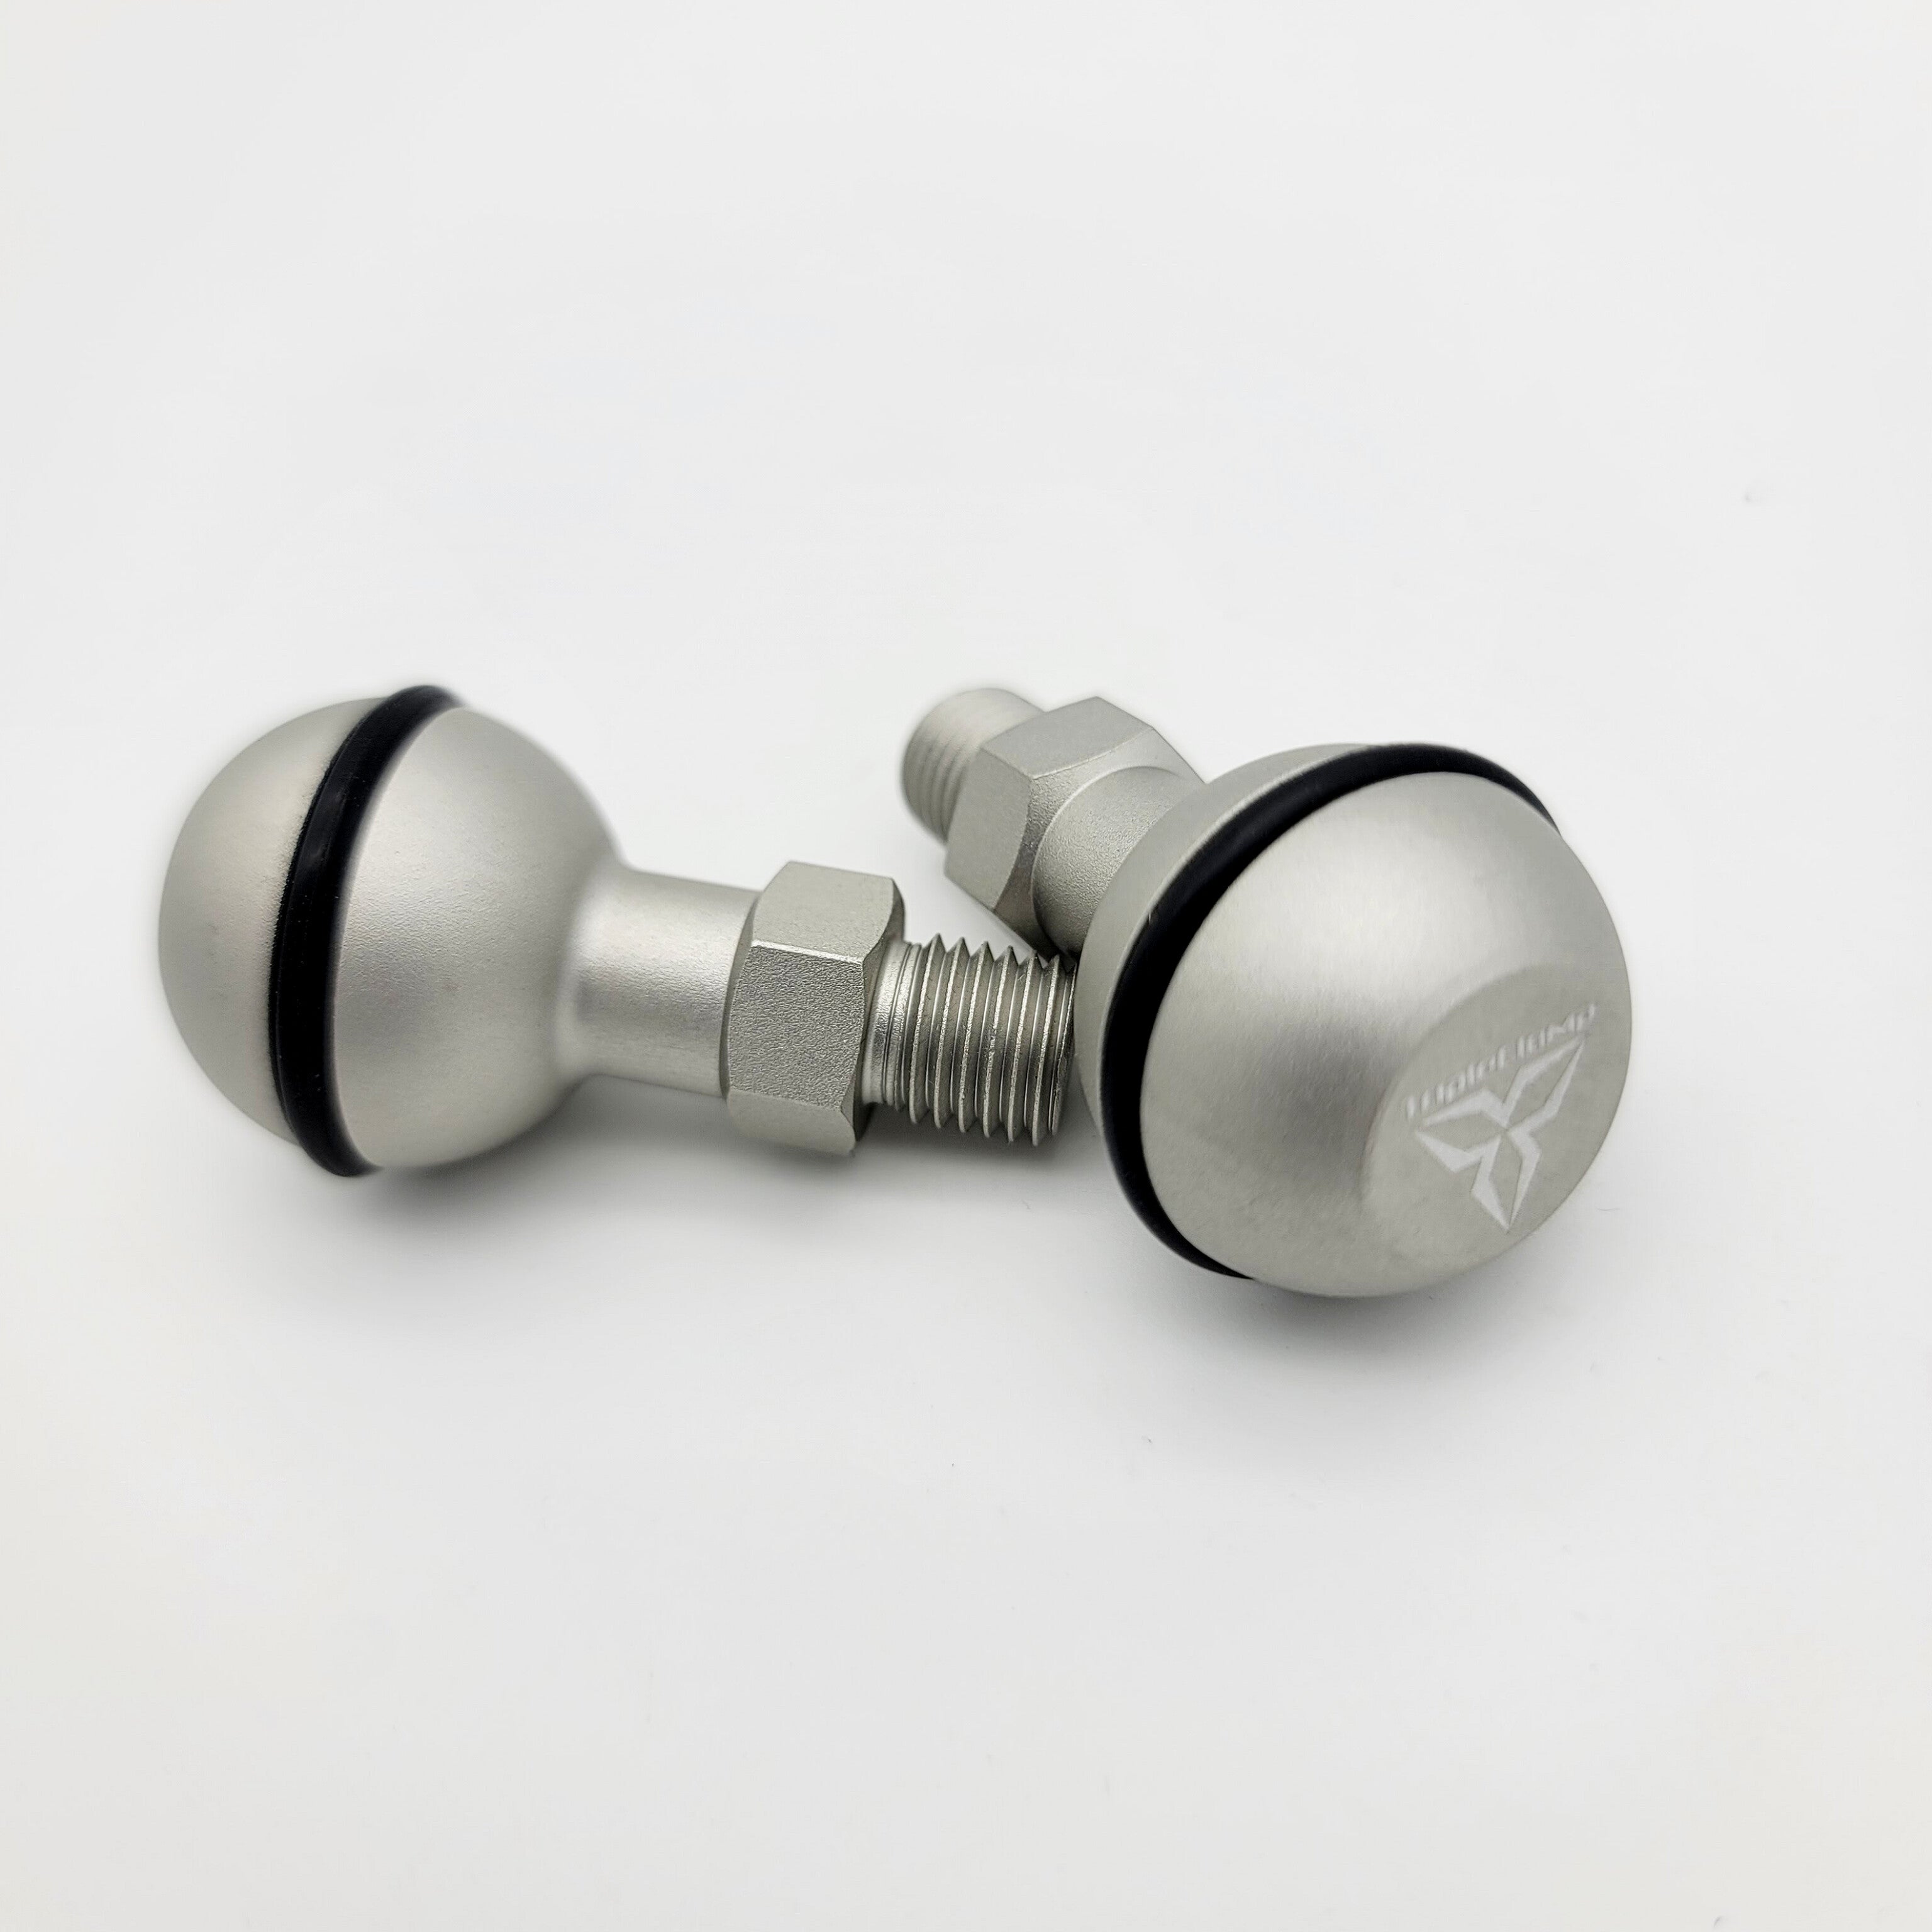 TripleClamp Moto - Solid Ball Stud for DoubleTake Mirrors